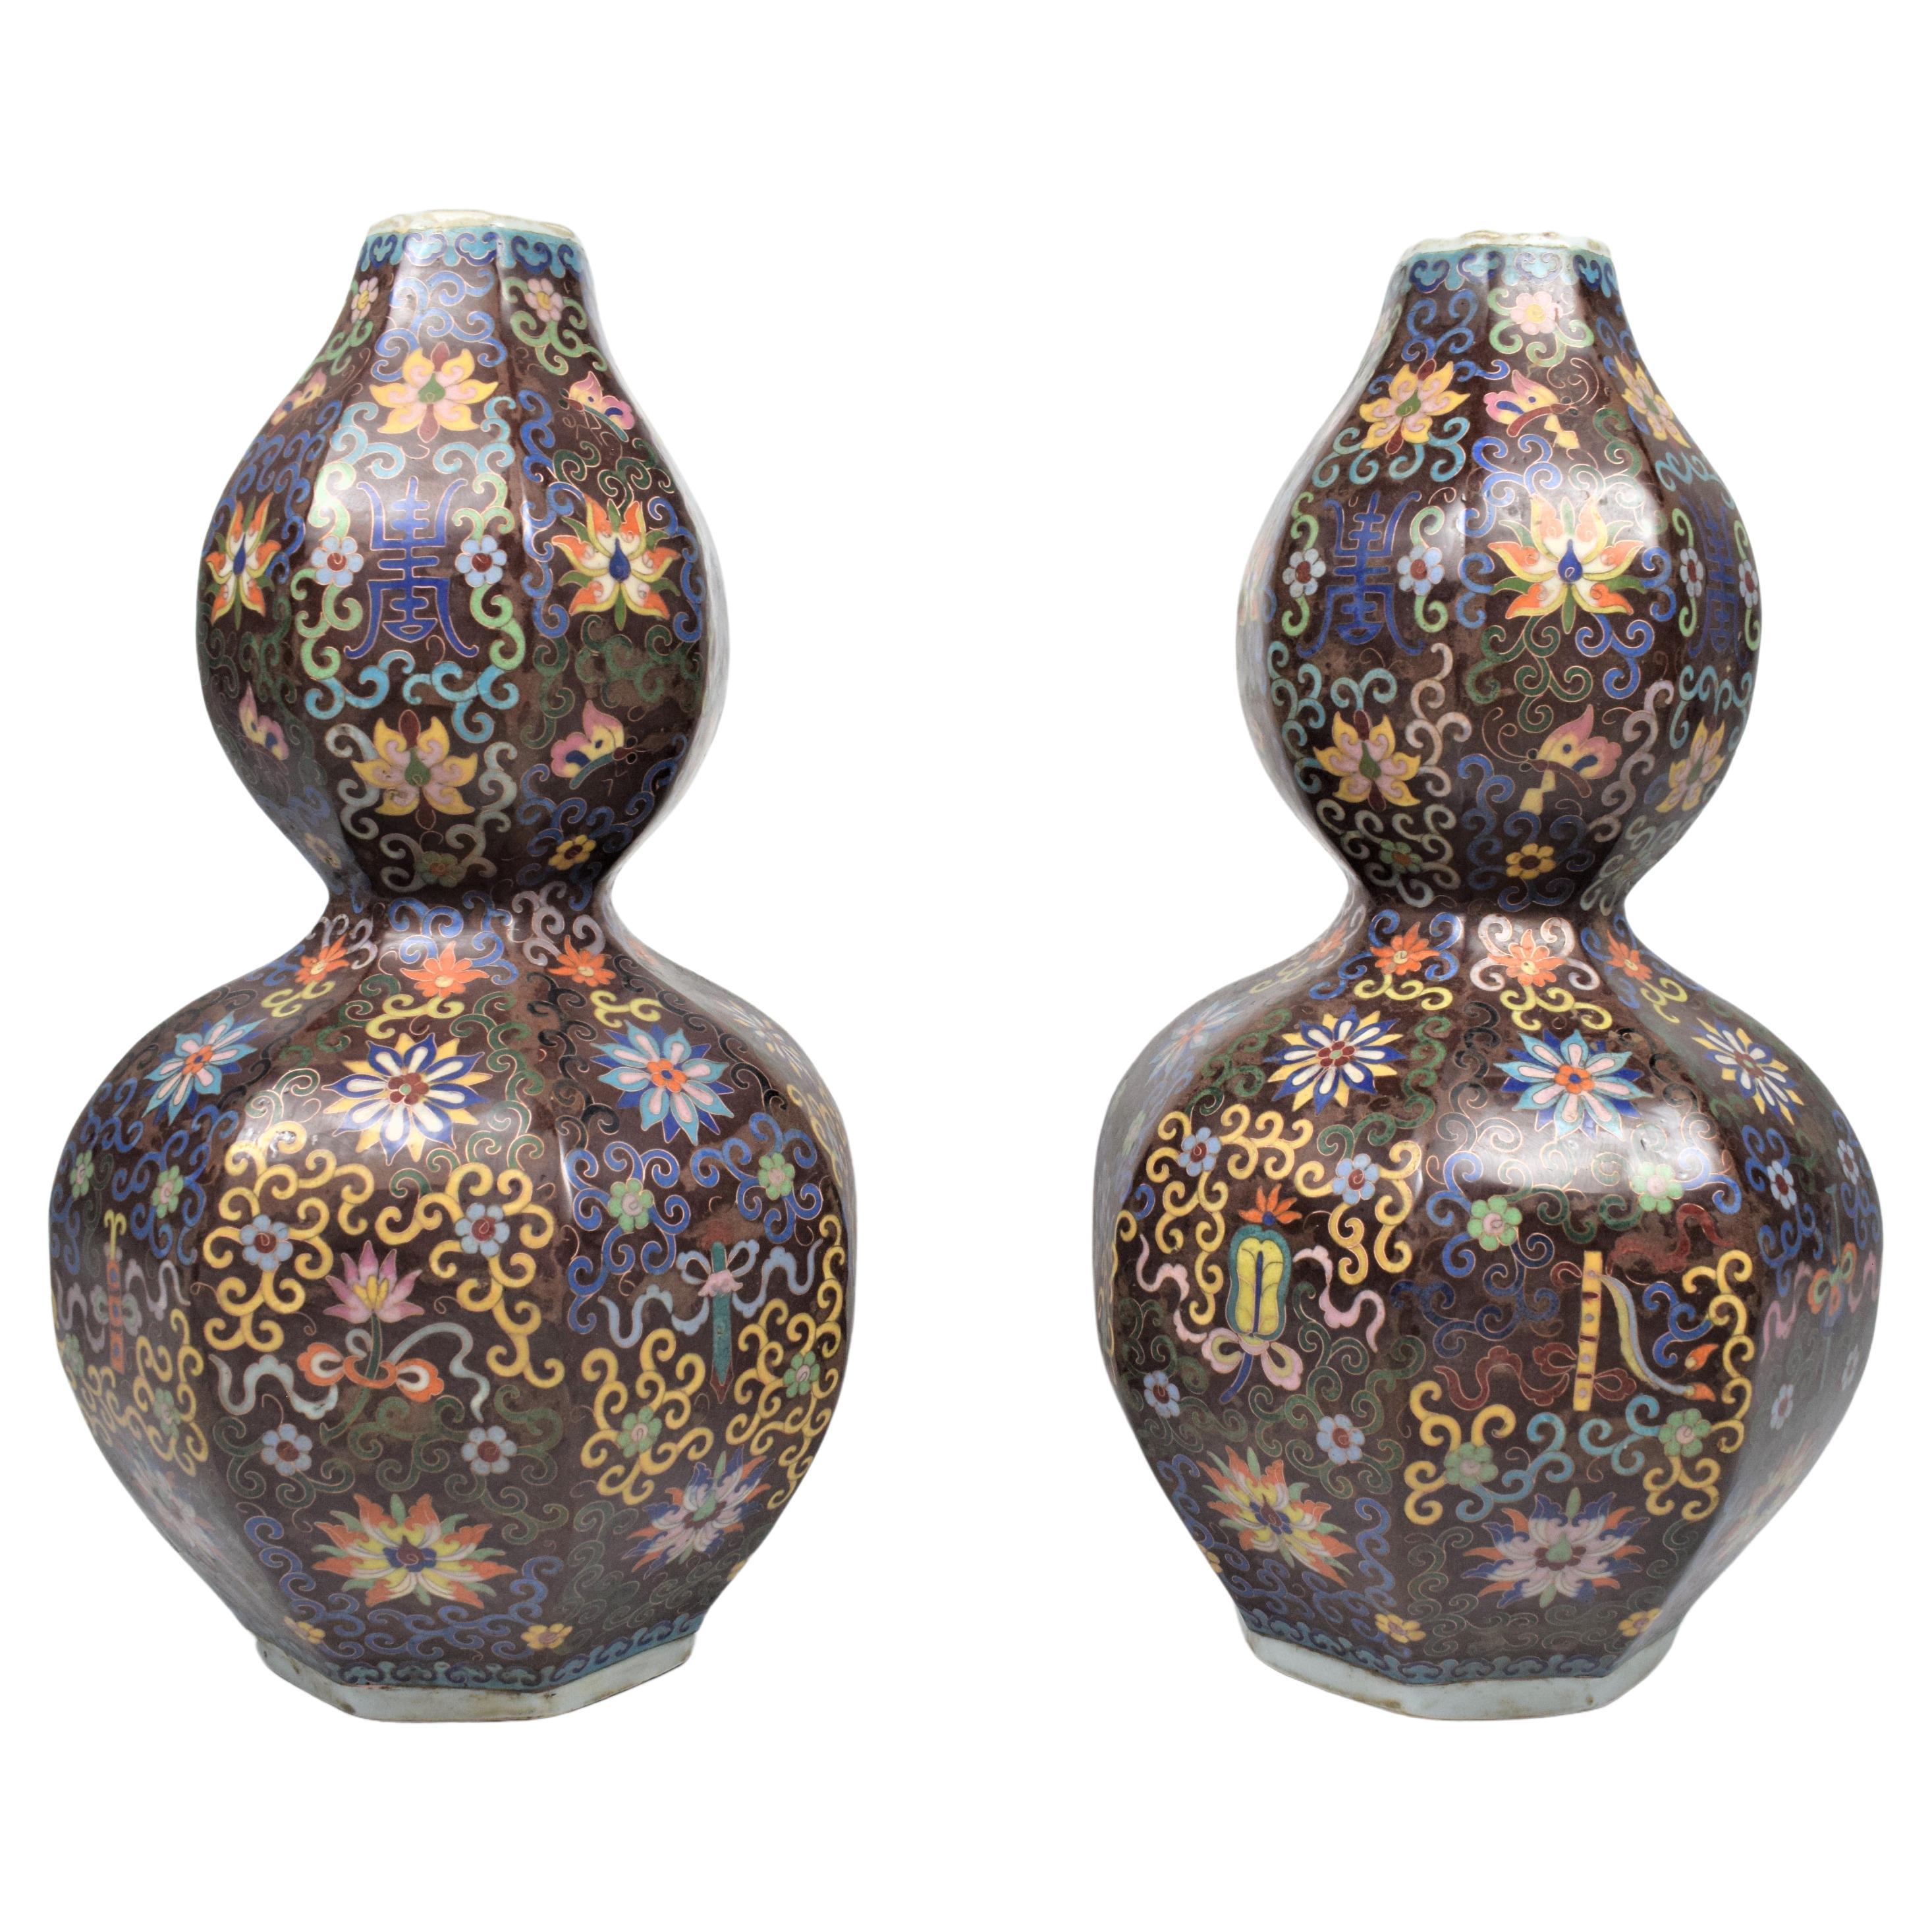 Pair of Large Cloisonné Enamel Double Gourd Bottle Vases Late Qing Dynasty